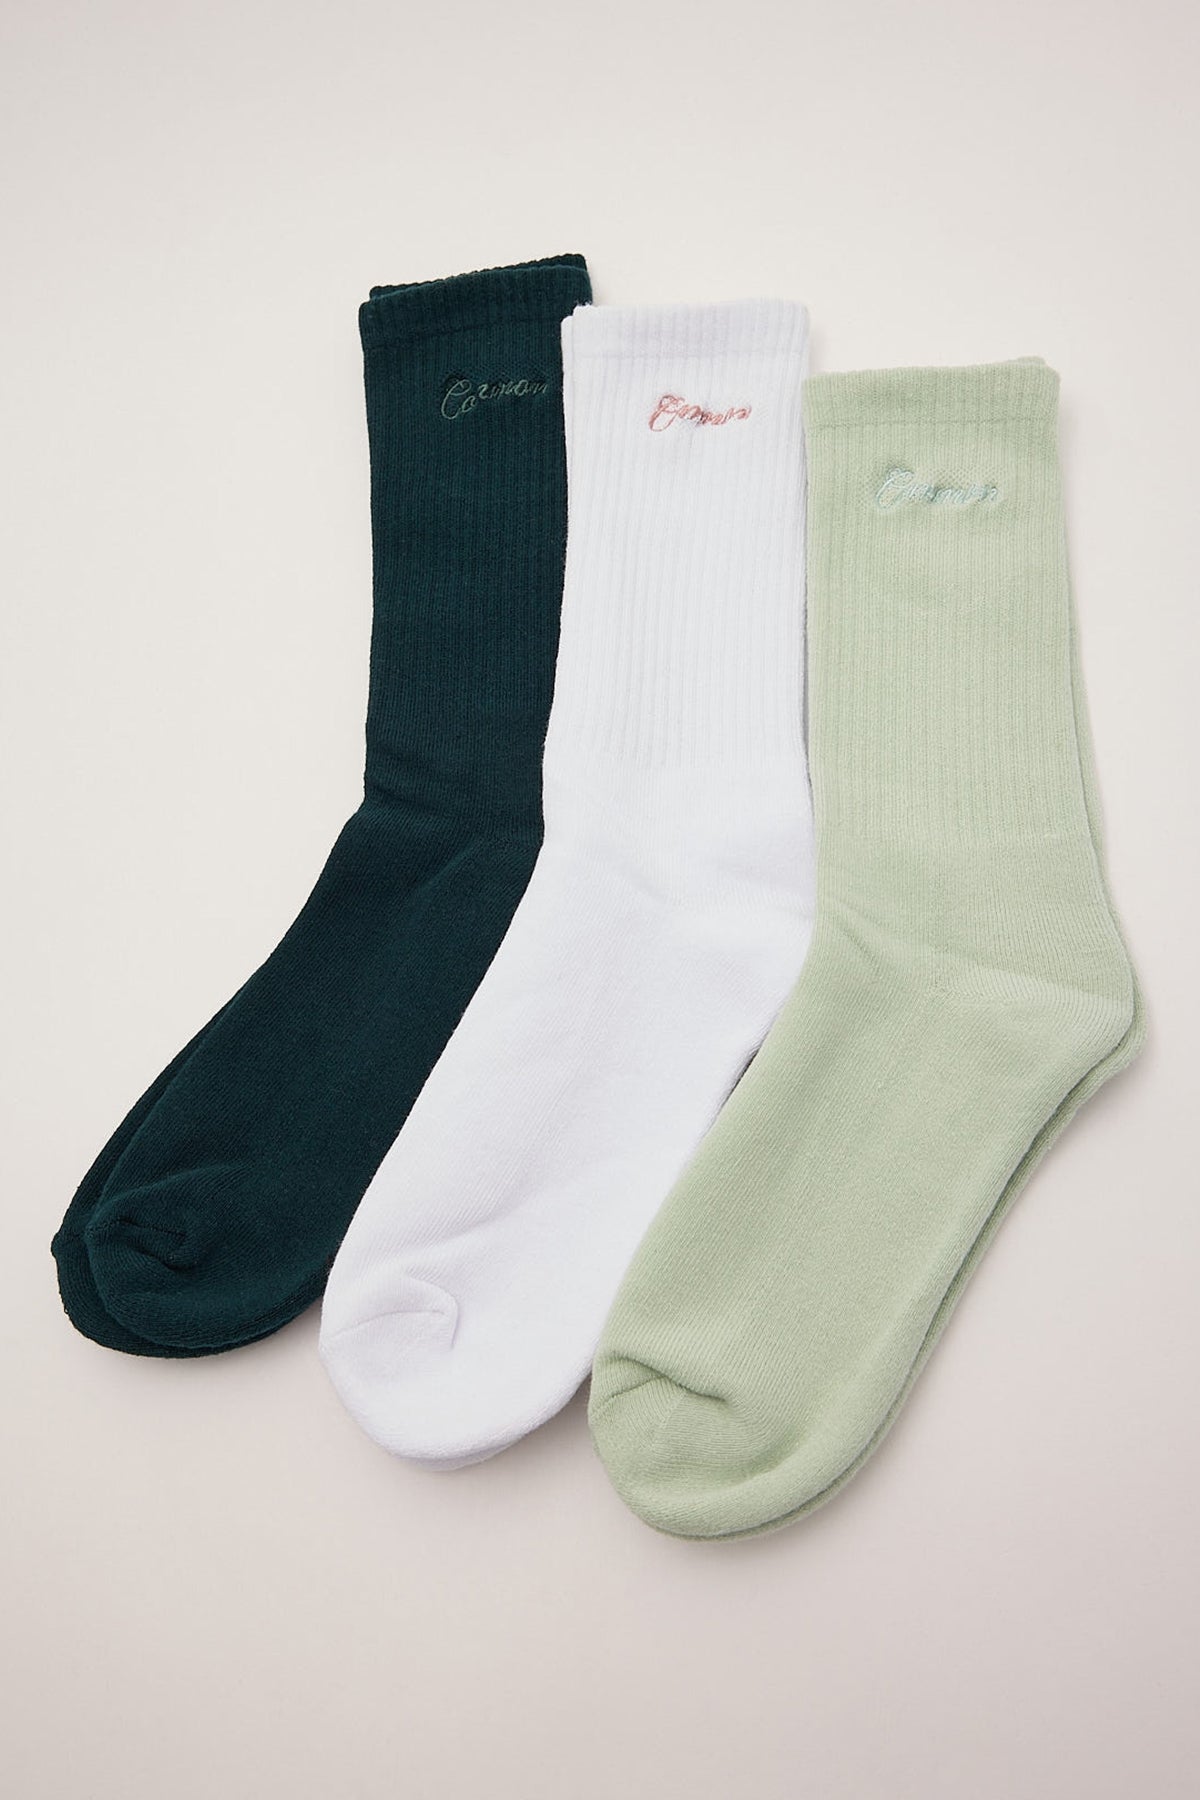 Common Need Dialogue Sock 3 Pack Mint/Teal/White